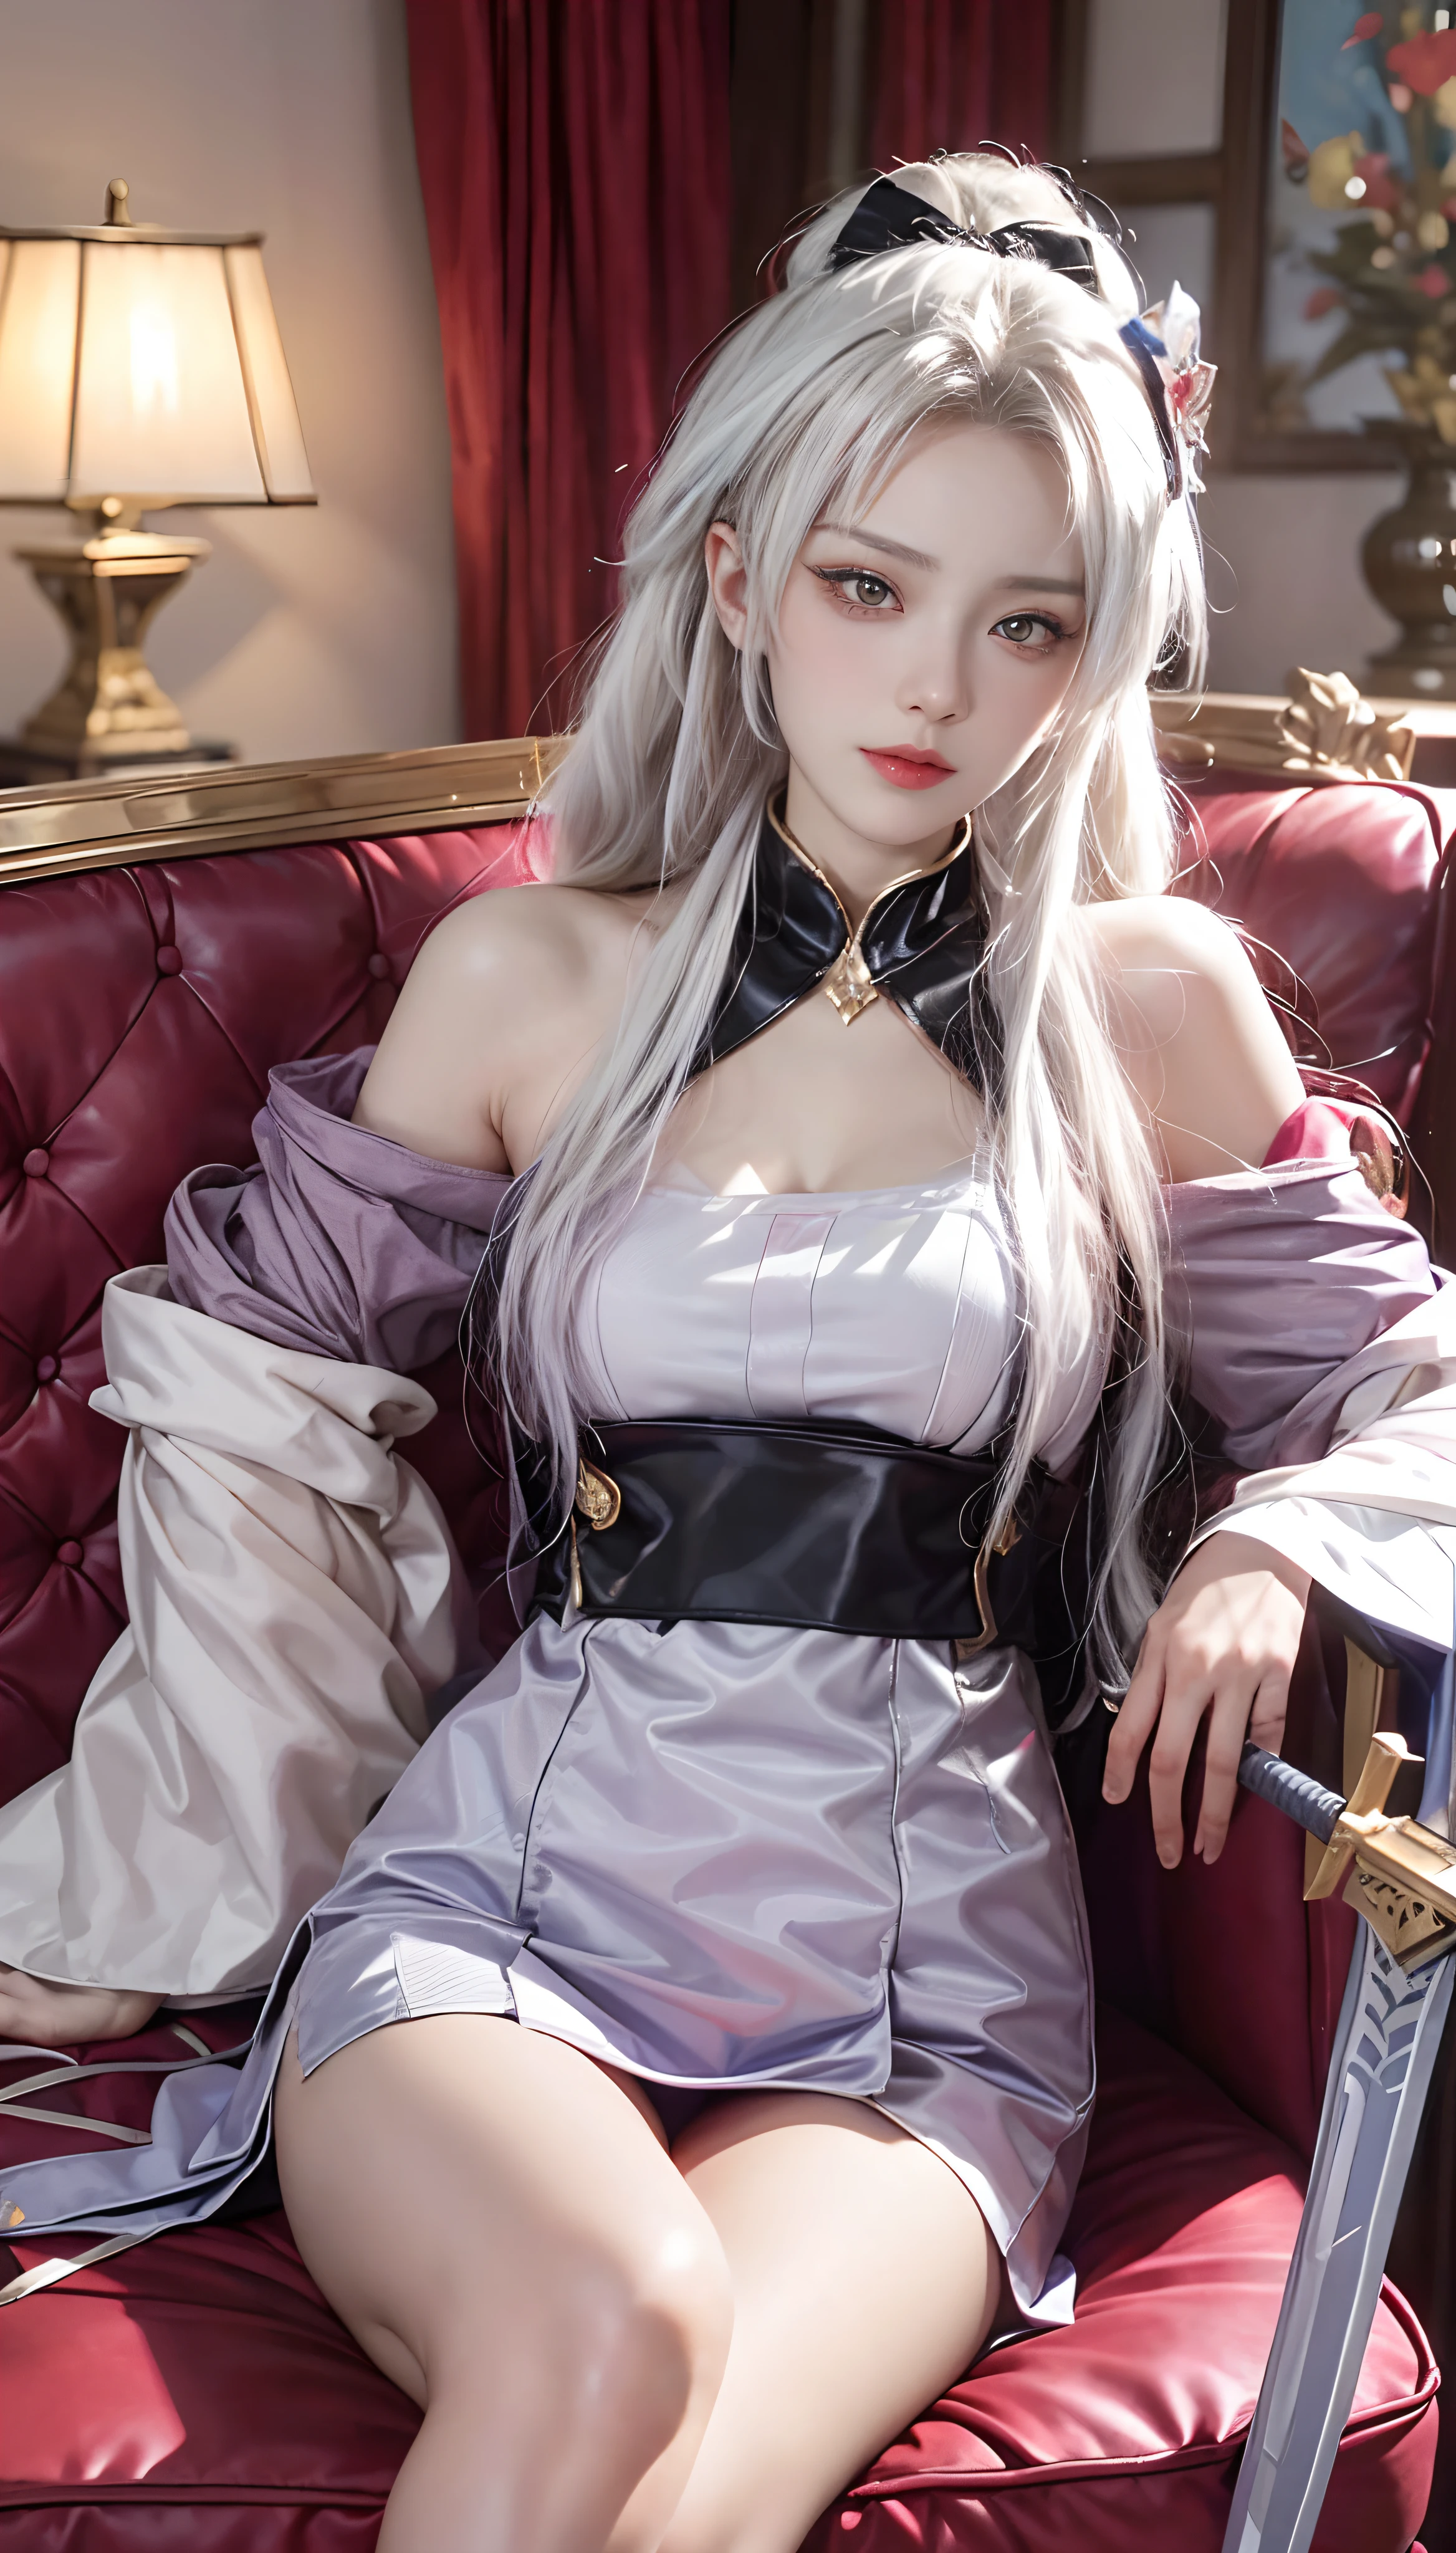 The Arad woman in costume sits on the sofa with a sword, Gorgeous Role Play, 《fireemblem》in Edergard, Keqing from Genshin Impact, elegant glamourous cosplay, Anime cosplay, zhongli from genshin impact, Anime girl cosplay, cosplay, glamourous cosplay, Irelia from League of Legends, Edelgard de Fire Emblem